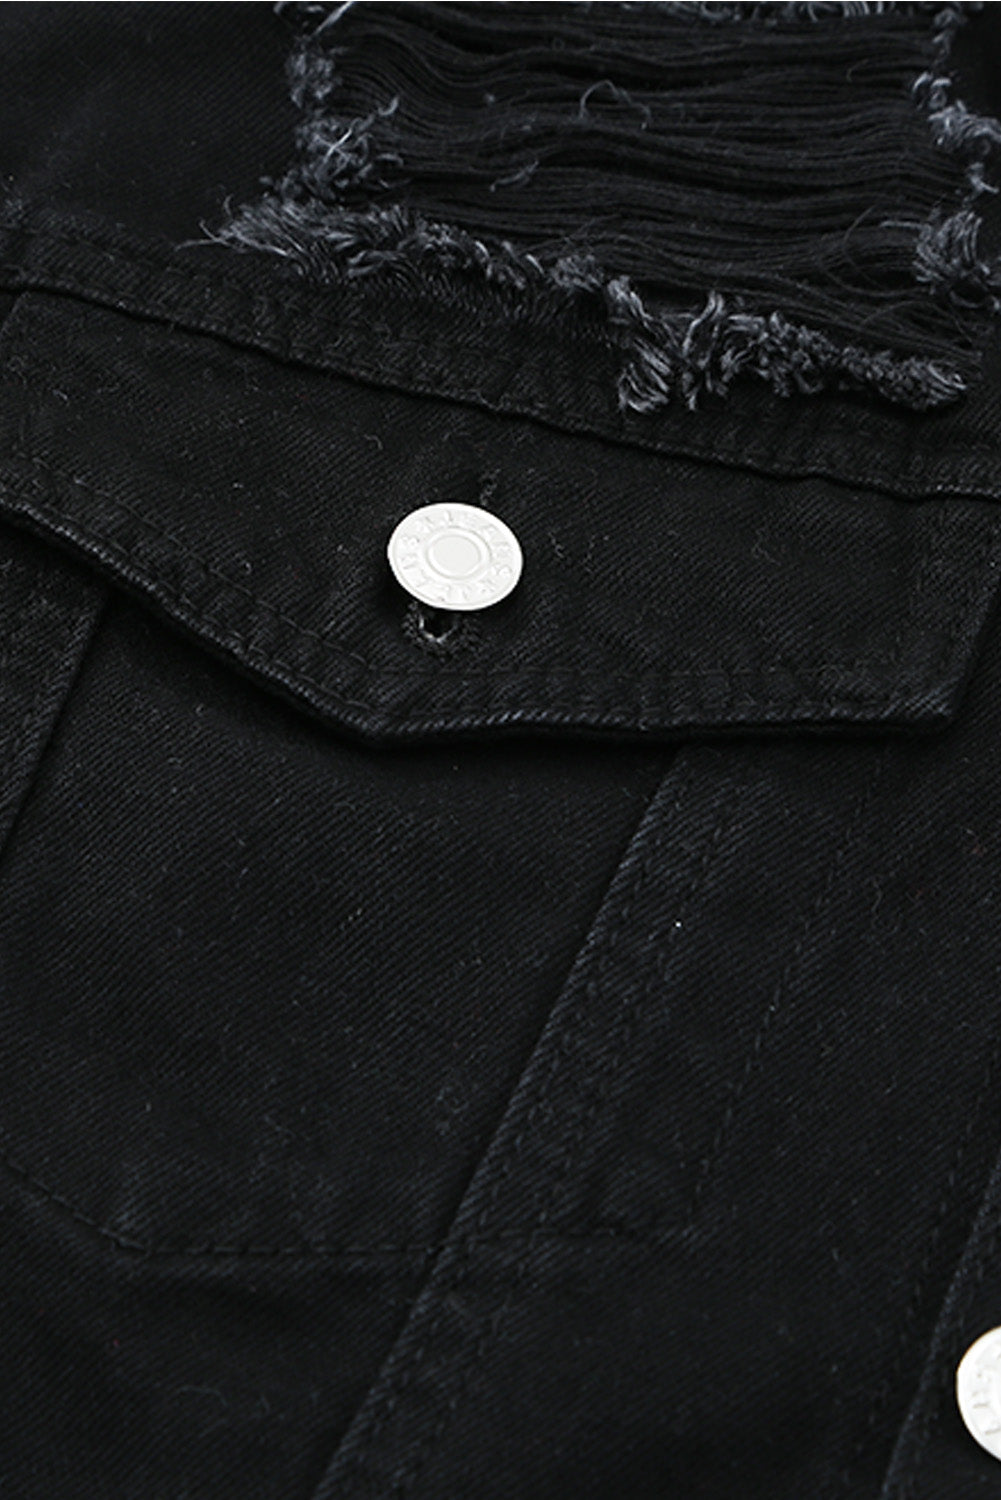 Distressed Button-Up Denim Jacket with Pockets OniTakai